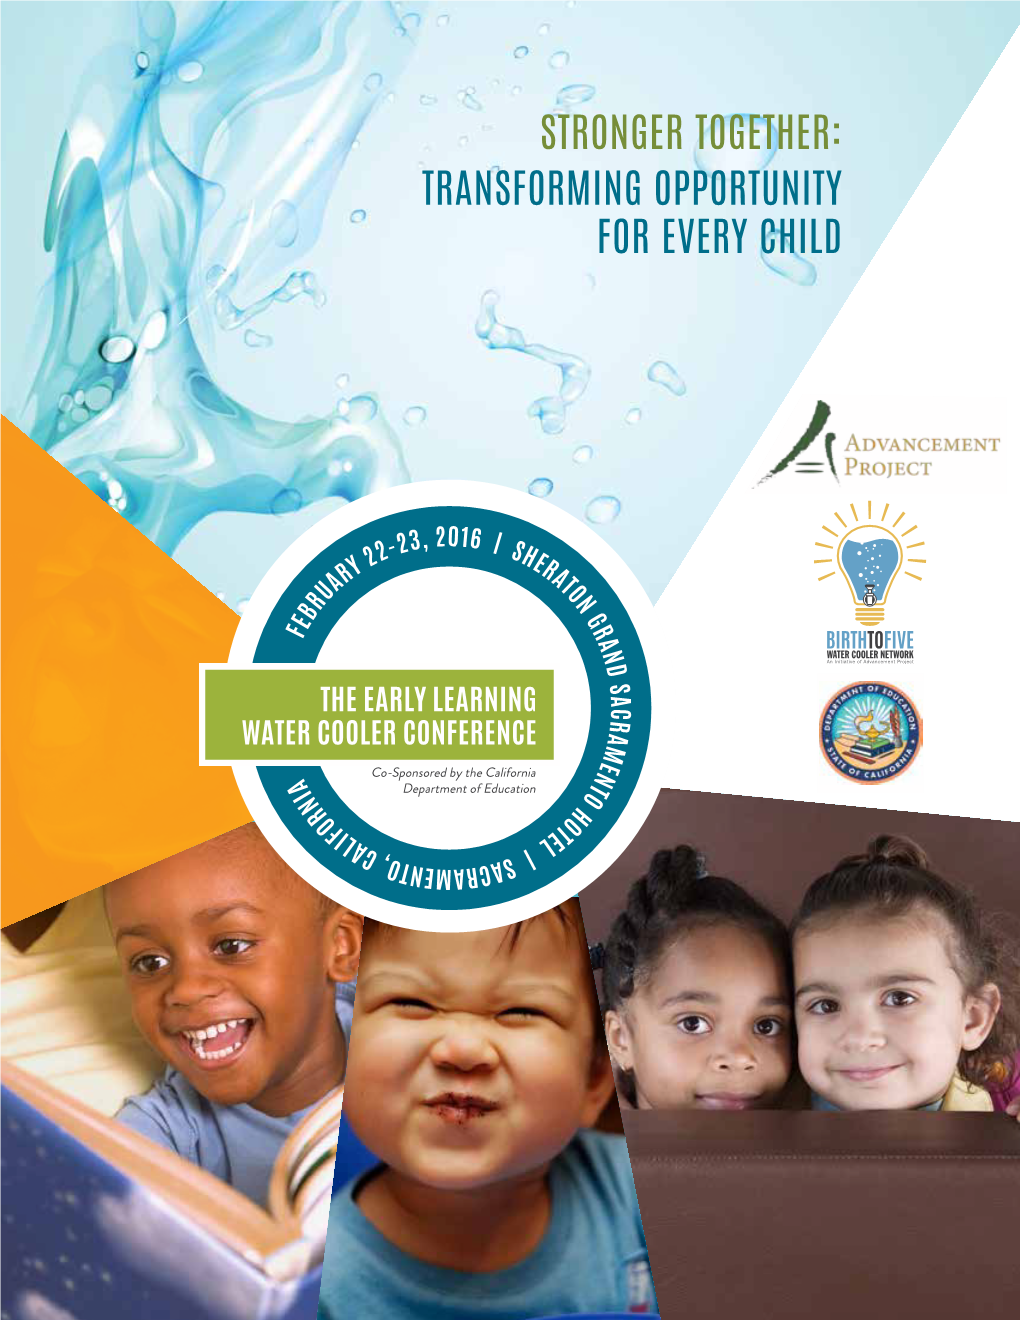 Transforming Opportunity for Every Child